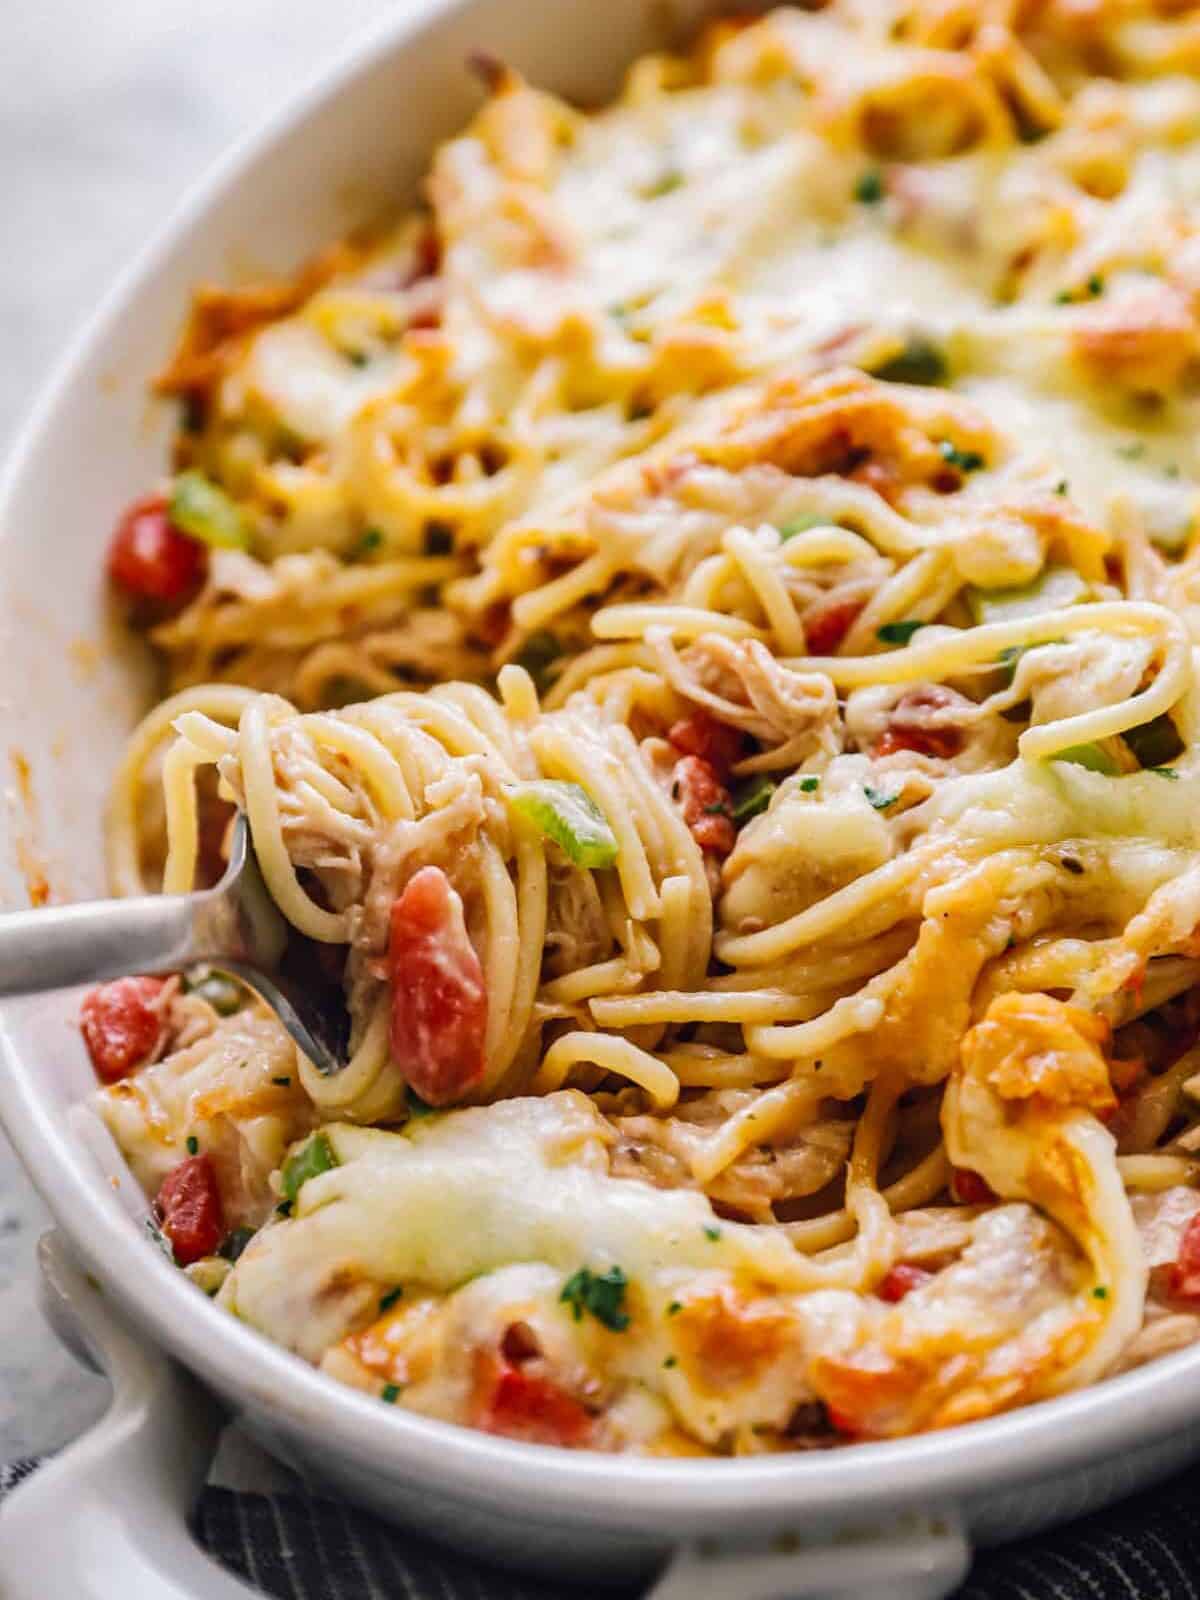 chicken spaghetti casserole filled with bell peppers and cheese